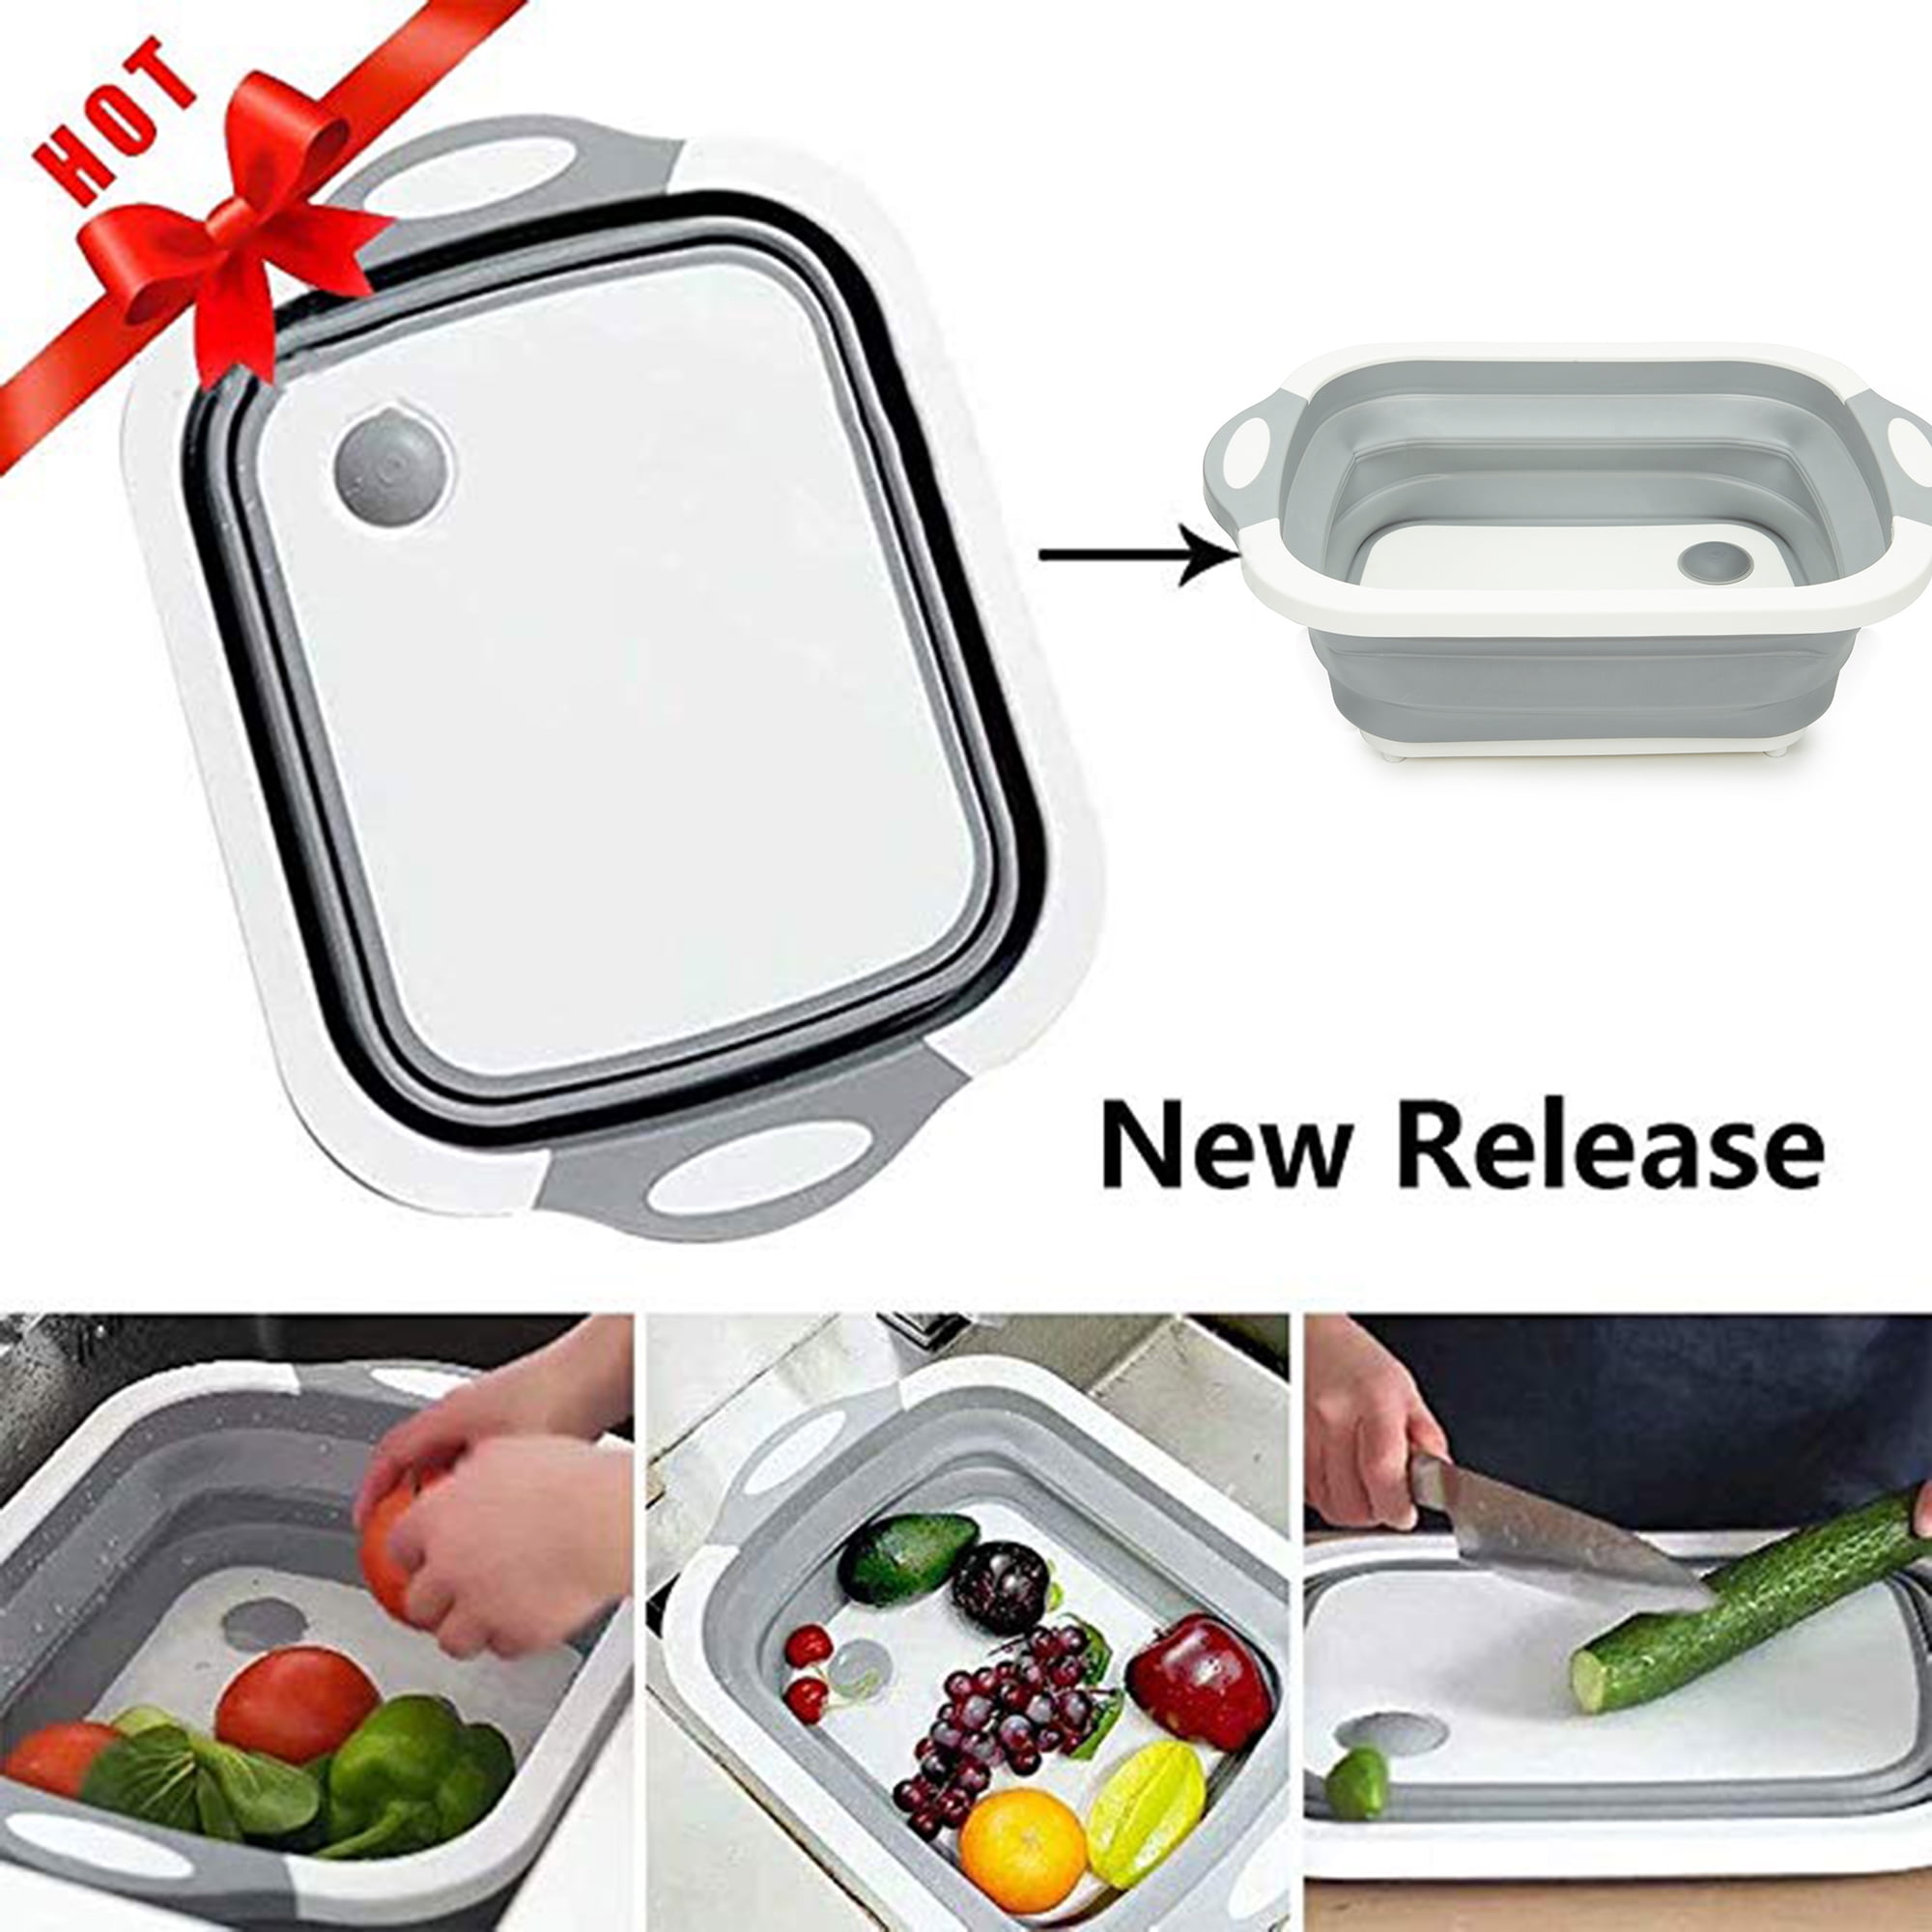 DALAIER Camping Dish Washing Tub Basin with Collapsible Cutting Board Colander,Basket with Draining Plug,Space Saving 3 in 1 Multifunction Storage Container for Kitchen Outdoor Travel